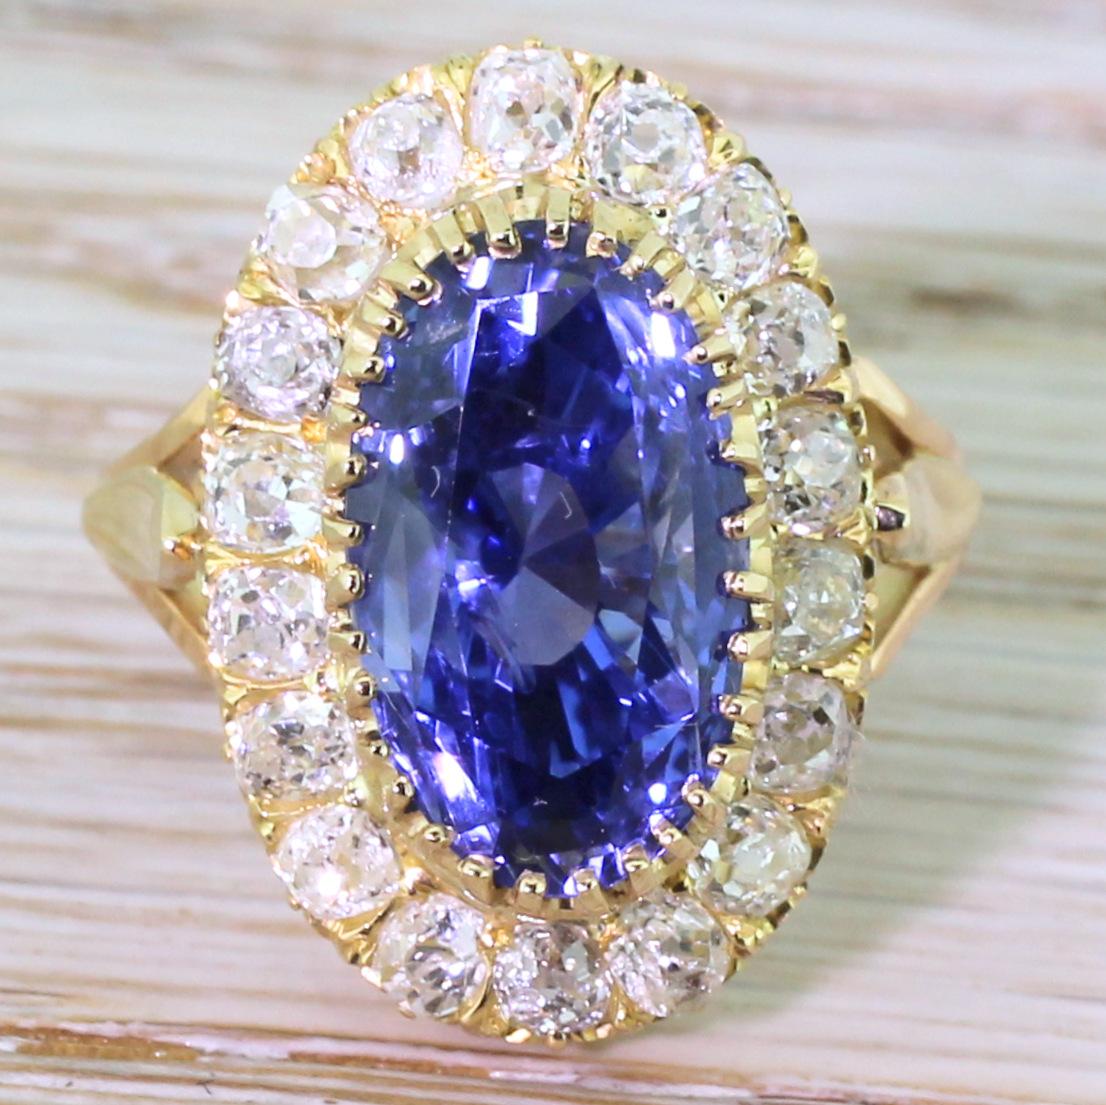 The most perfect blue. This glowing cornflower Ceylon sapphire – natural, unheated – is claw-set above a surround of eighteen high white and bright old cut diamonds. The finely hand-pierced gallery leads to a split shoulder shank with an over-sized